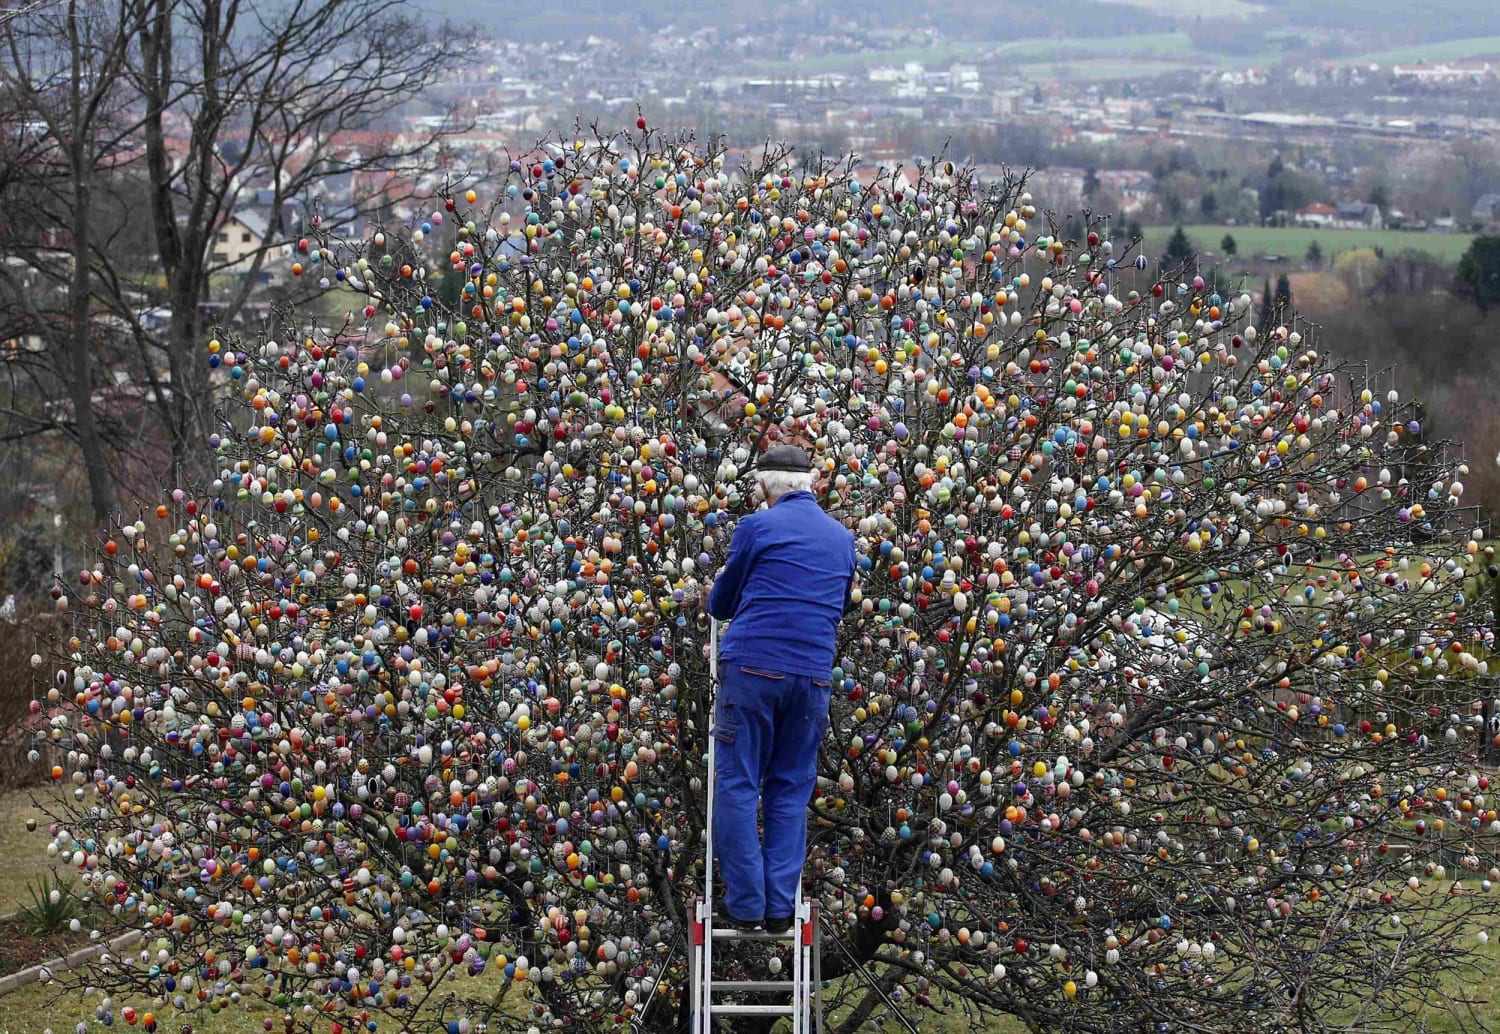 50-Year Tradition: Couple Trims Tree With 10,000 Easter Eggs